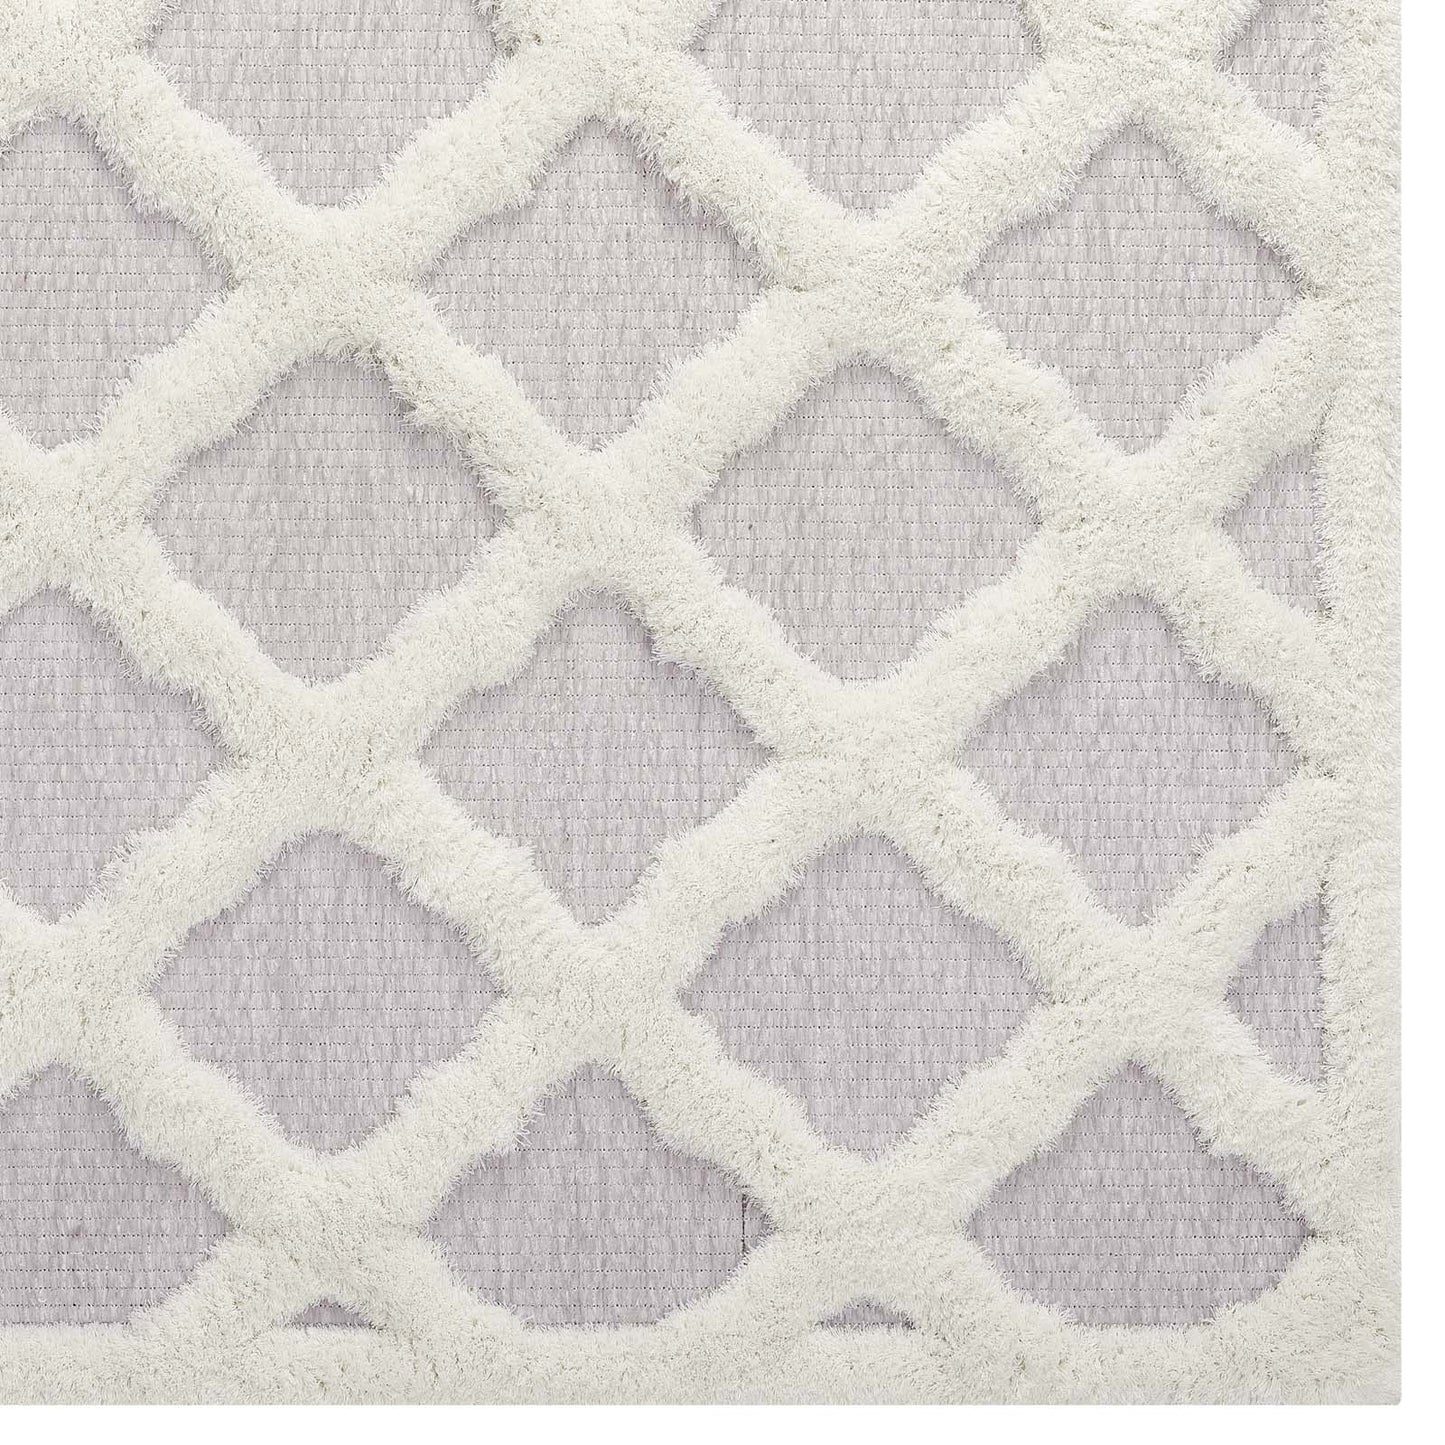 Whimsical Regale Abstract Moroccan Trellis 5x8 Shag Area Rug Ivory and Light Gray R-1154A-58